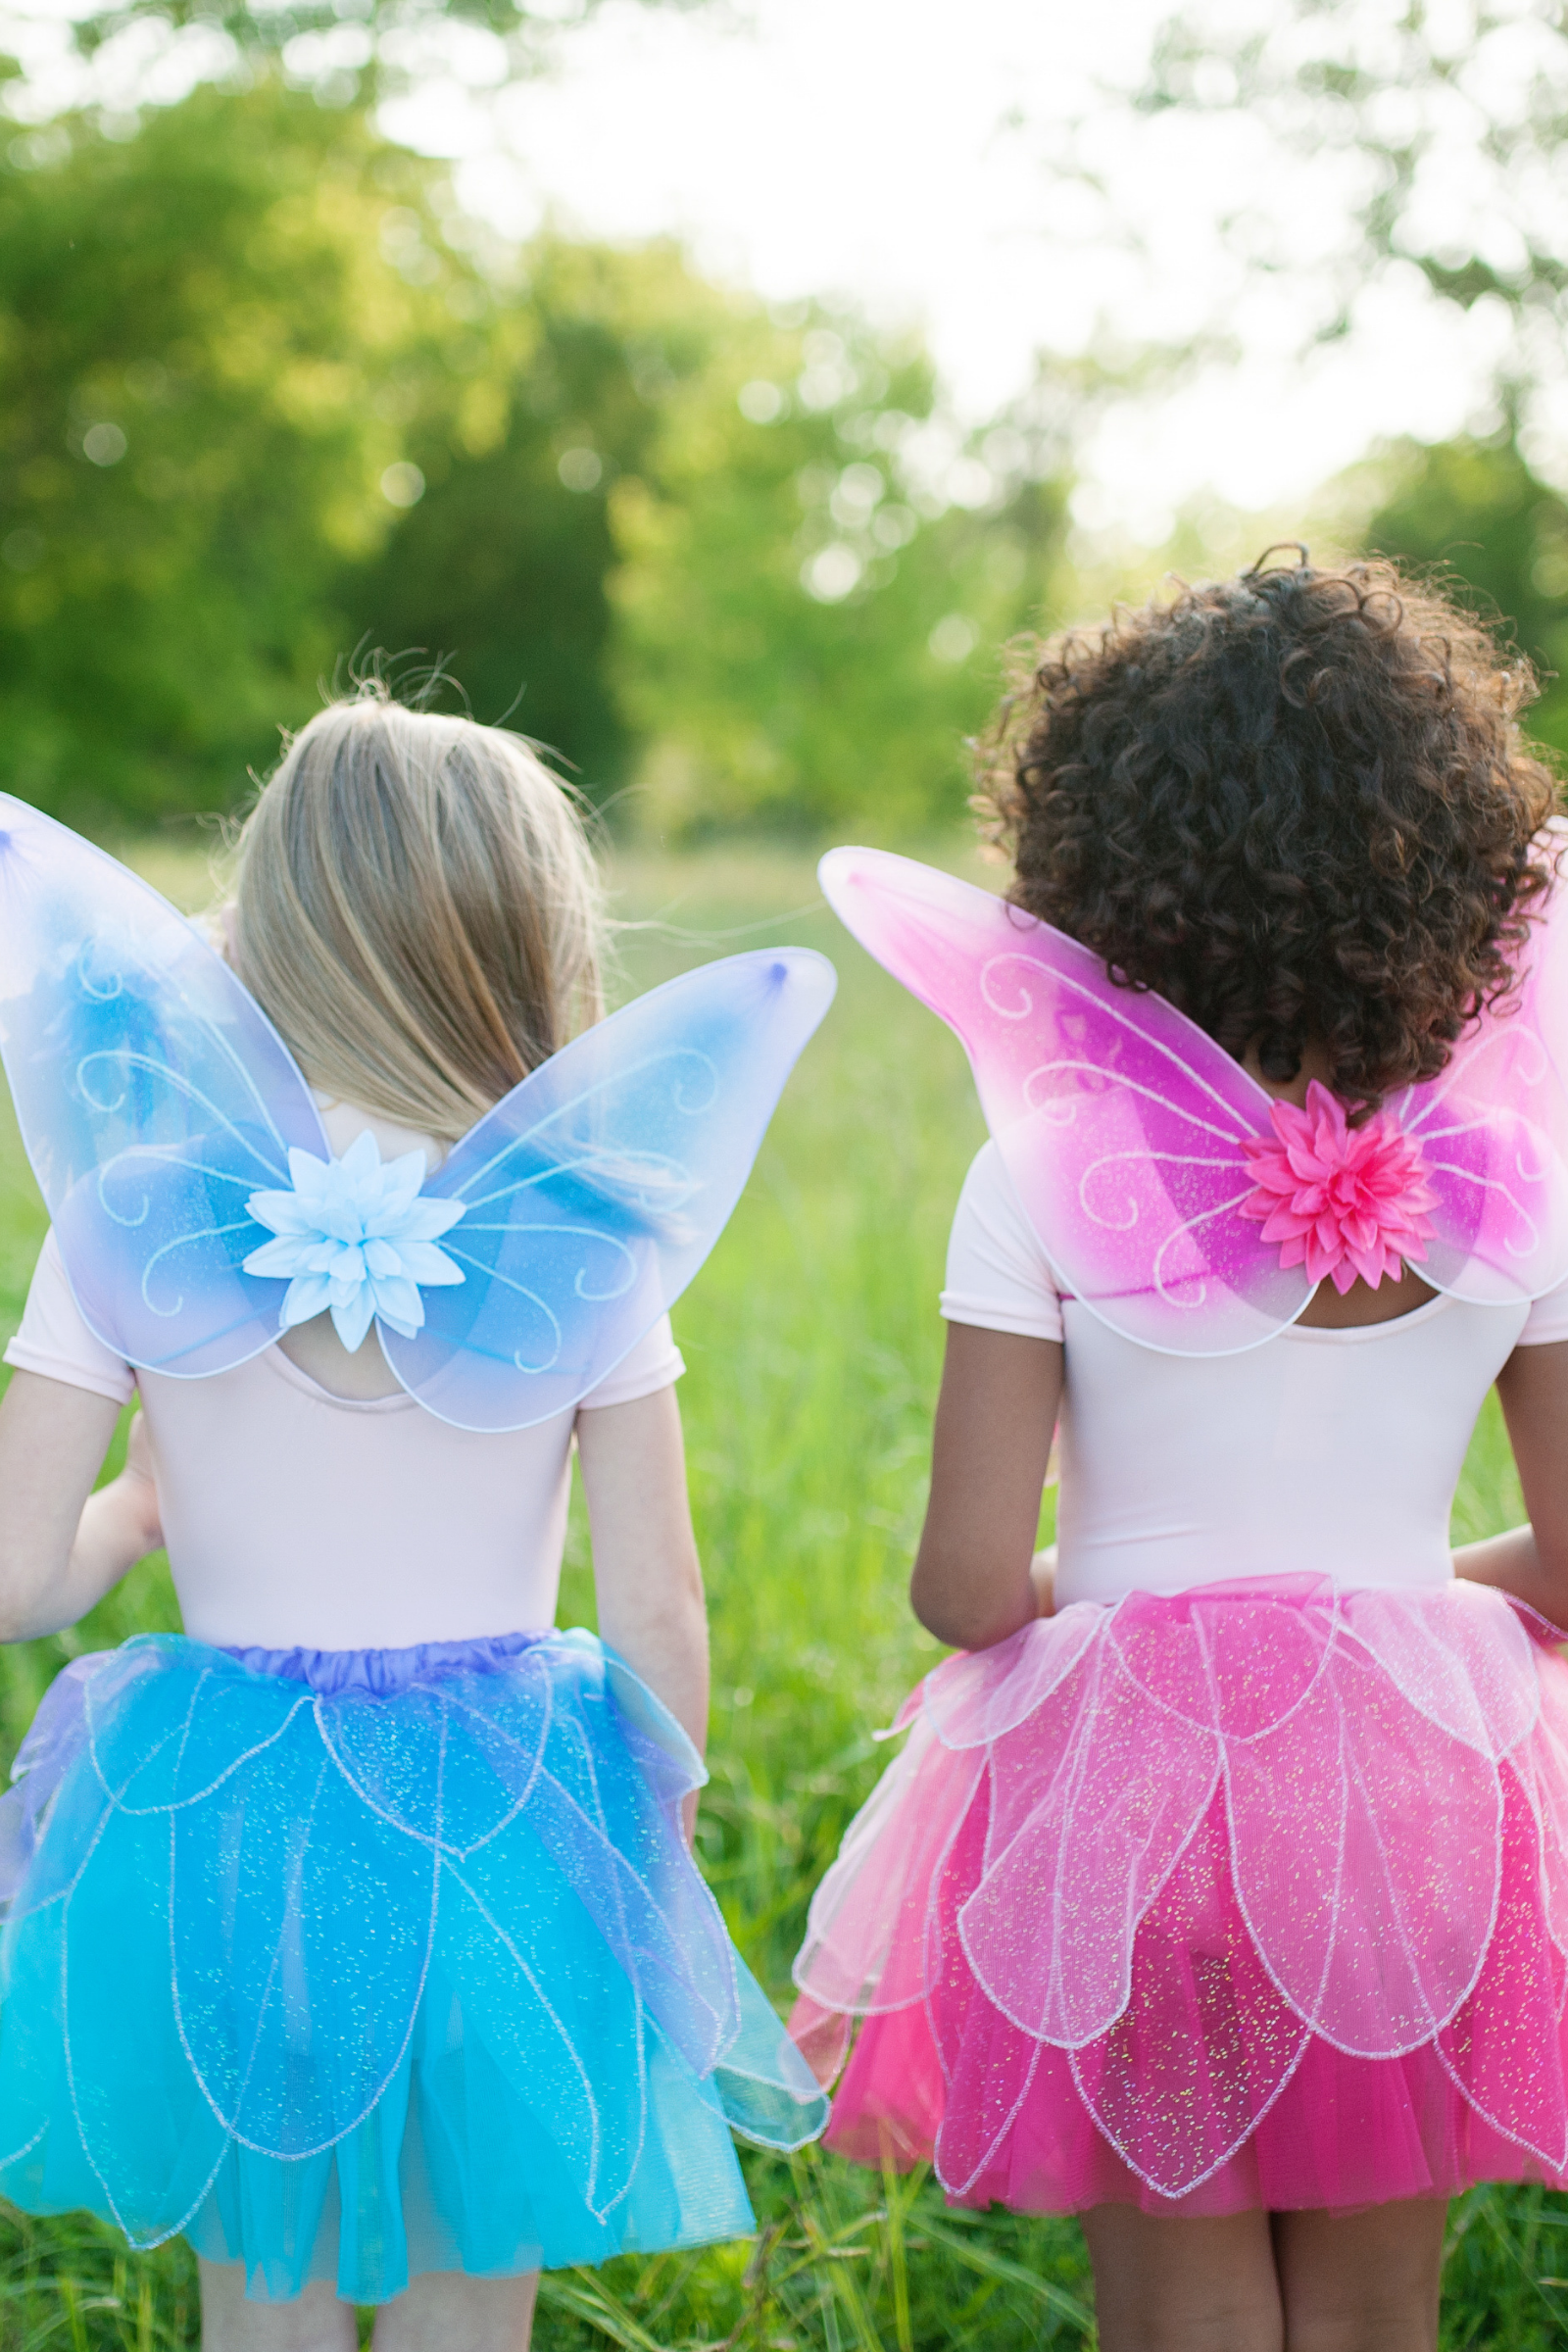 Fancy Flutter Skirt Sets with Wings & Wands